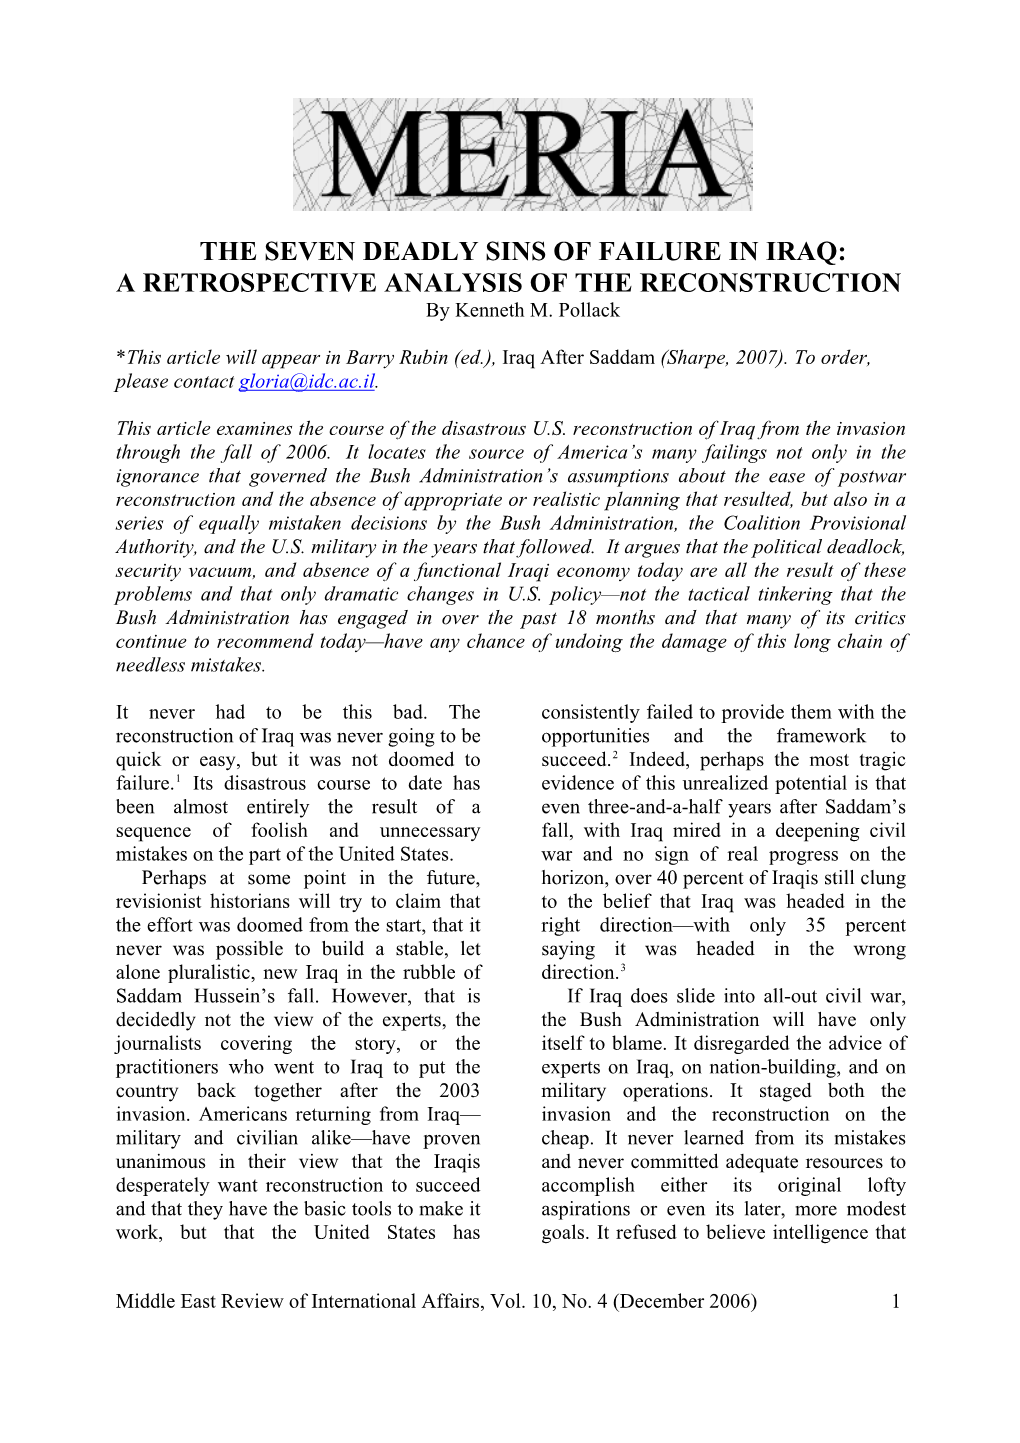 THE SEVEN DEADLY SINS of FAILURE in IRAQ: a RETROSPECTIVE ANALYSIS of the RECONSTRUCTION by Kenneth M